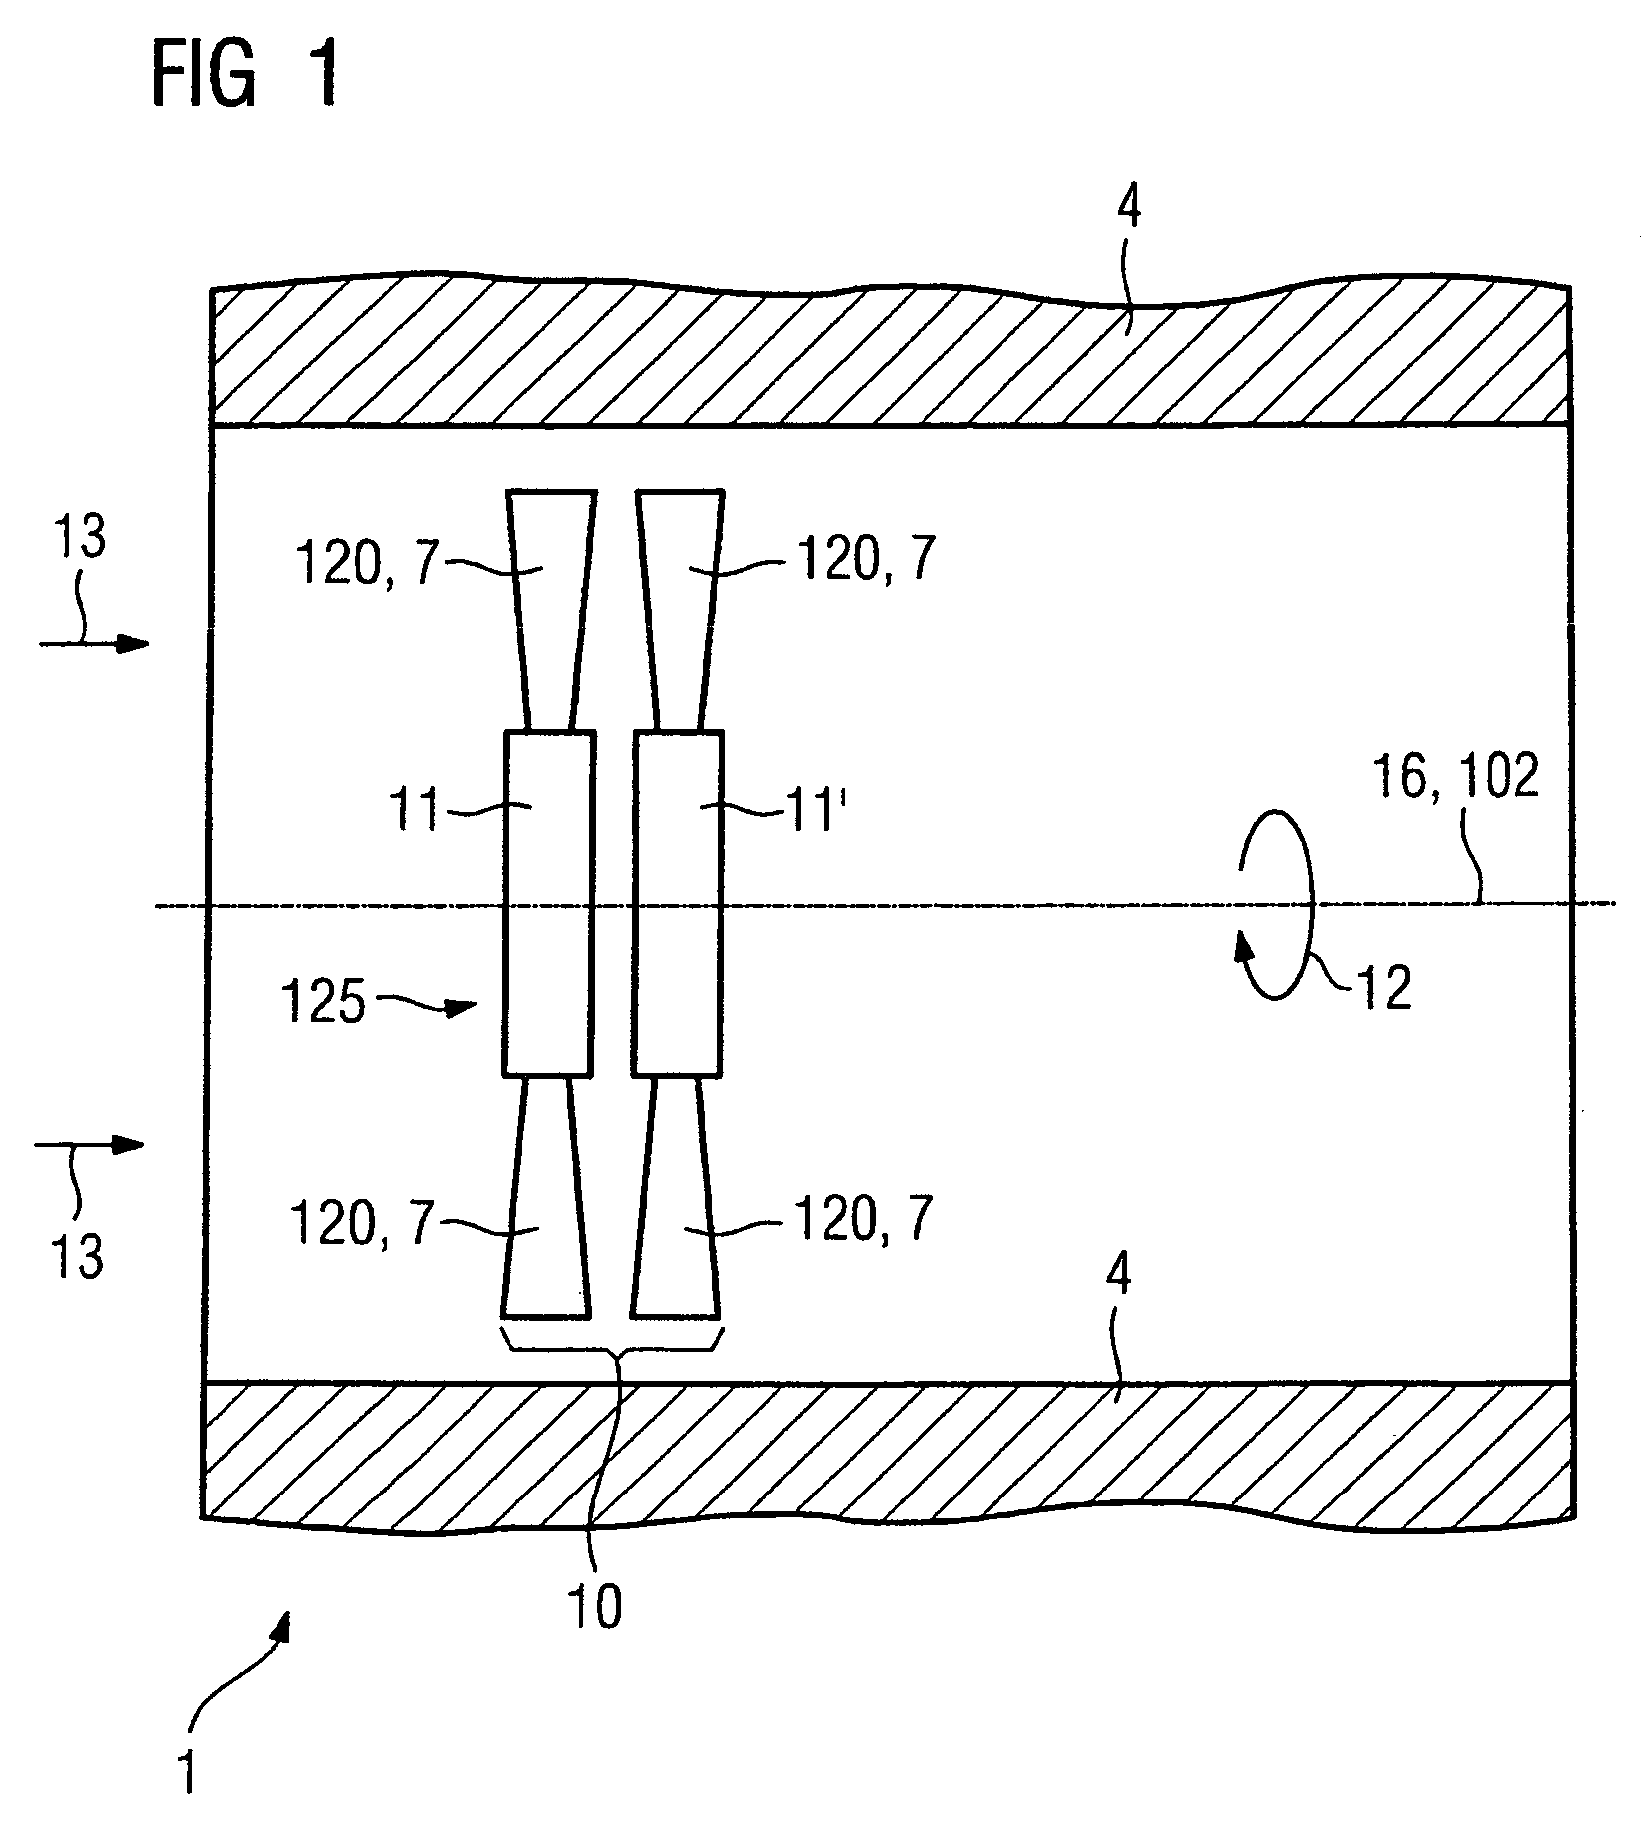 Process for in situ coating of turbo-machine components